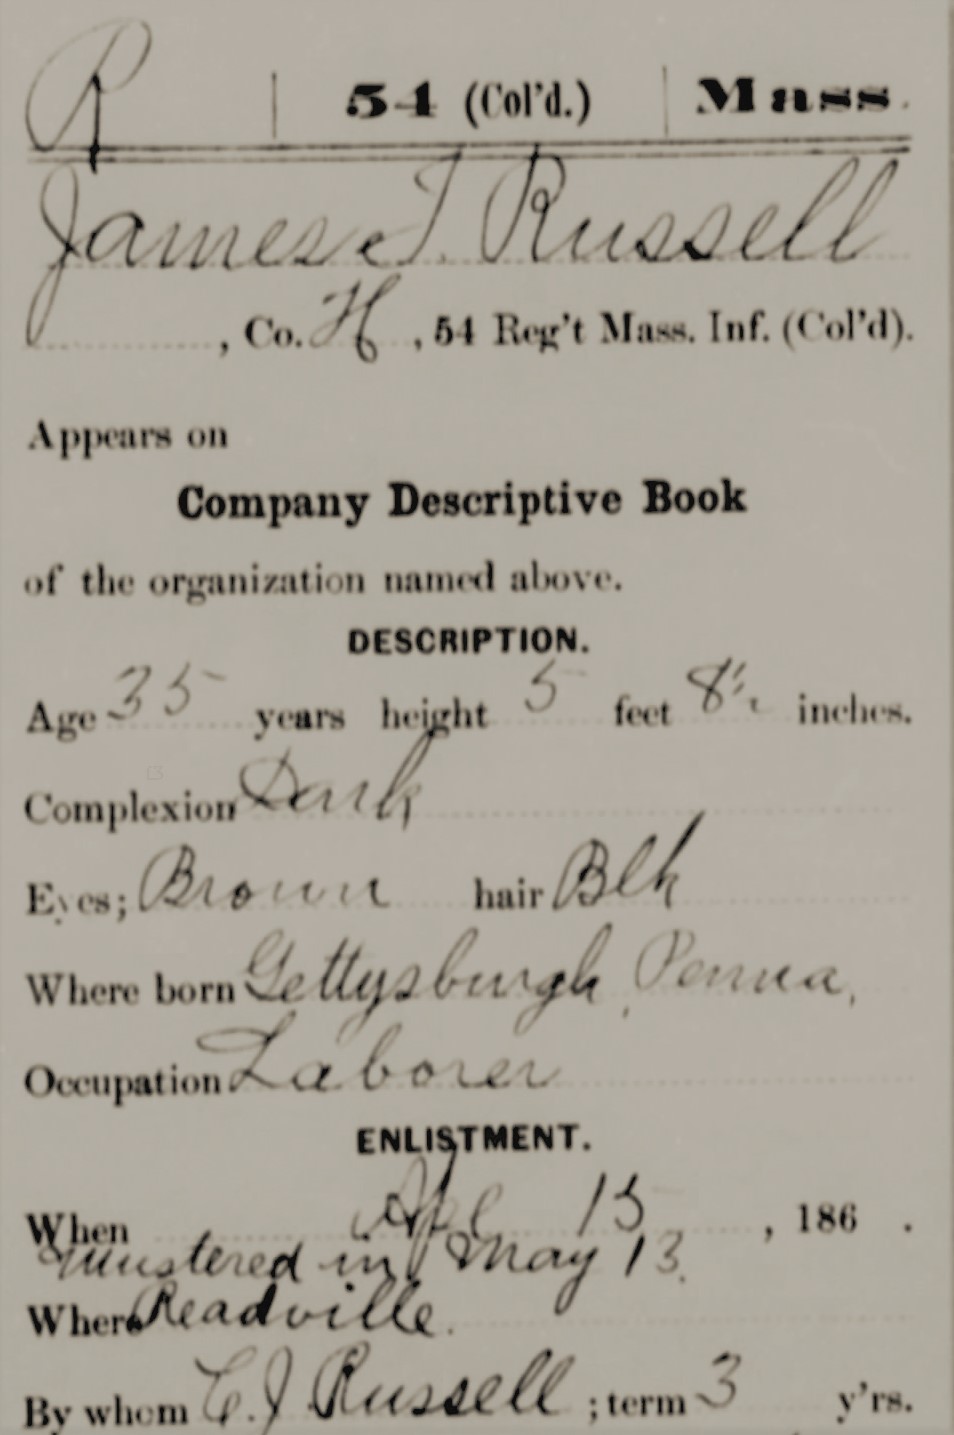 Service Record of Pvt. James T. Russell, National Archives